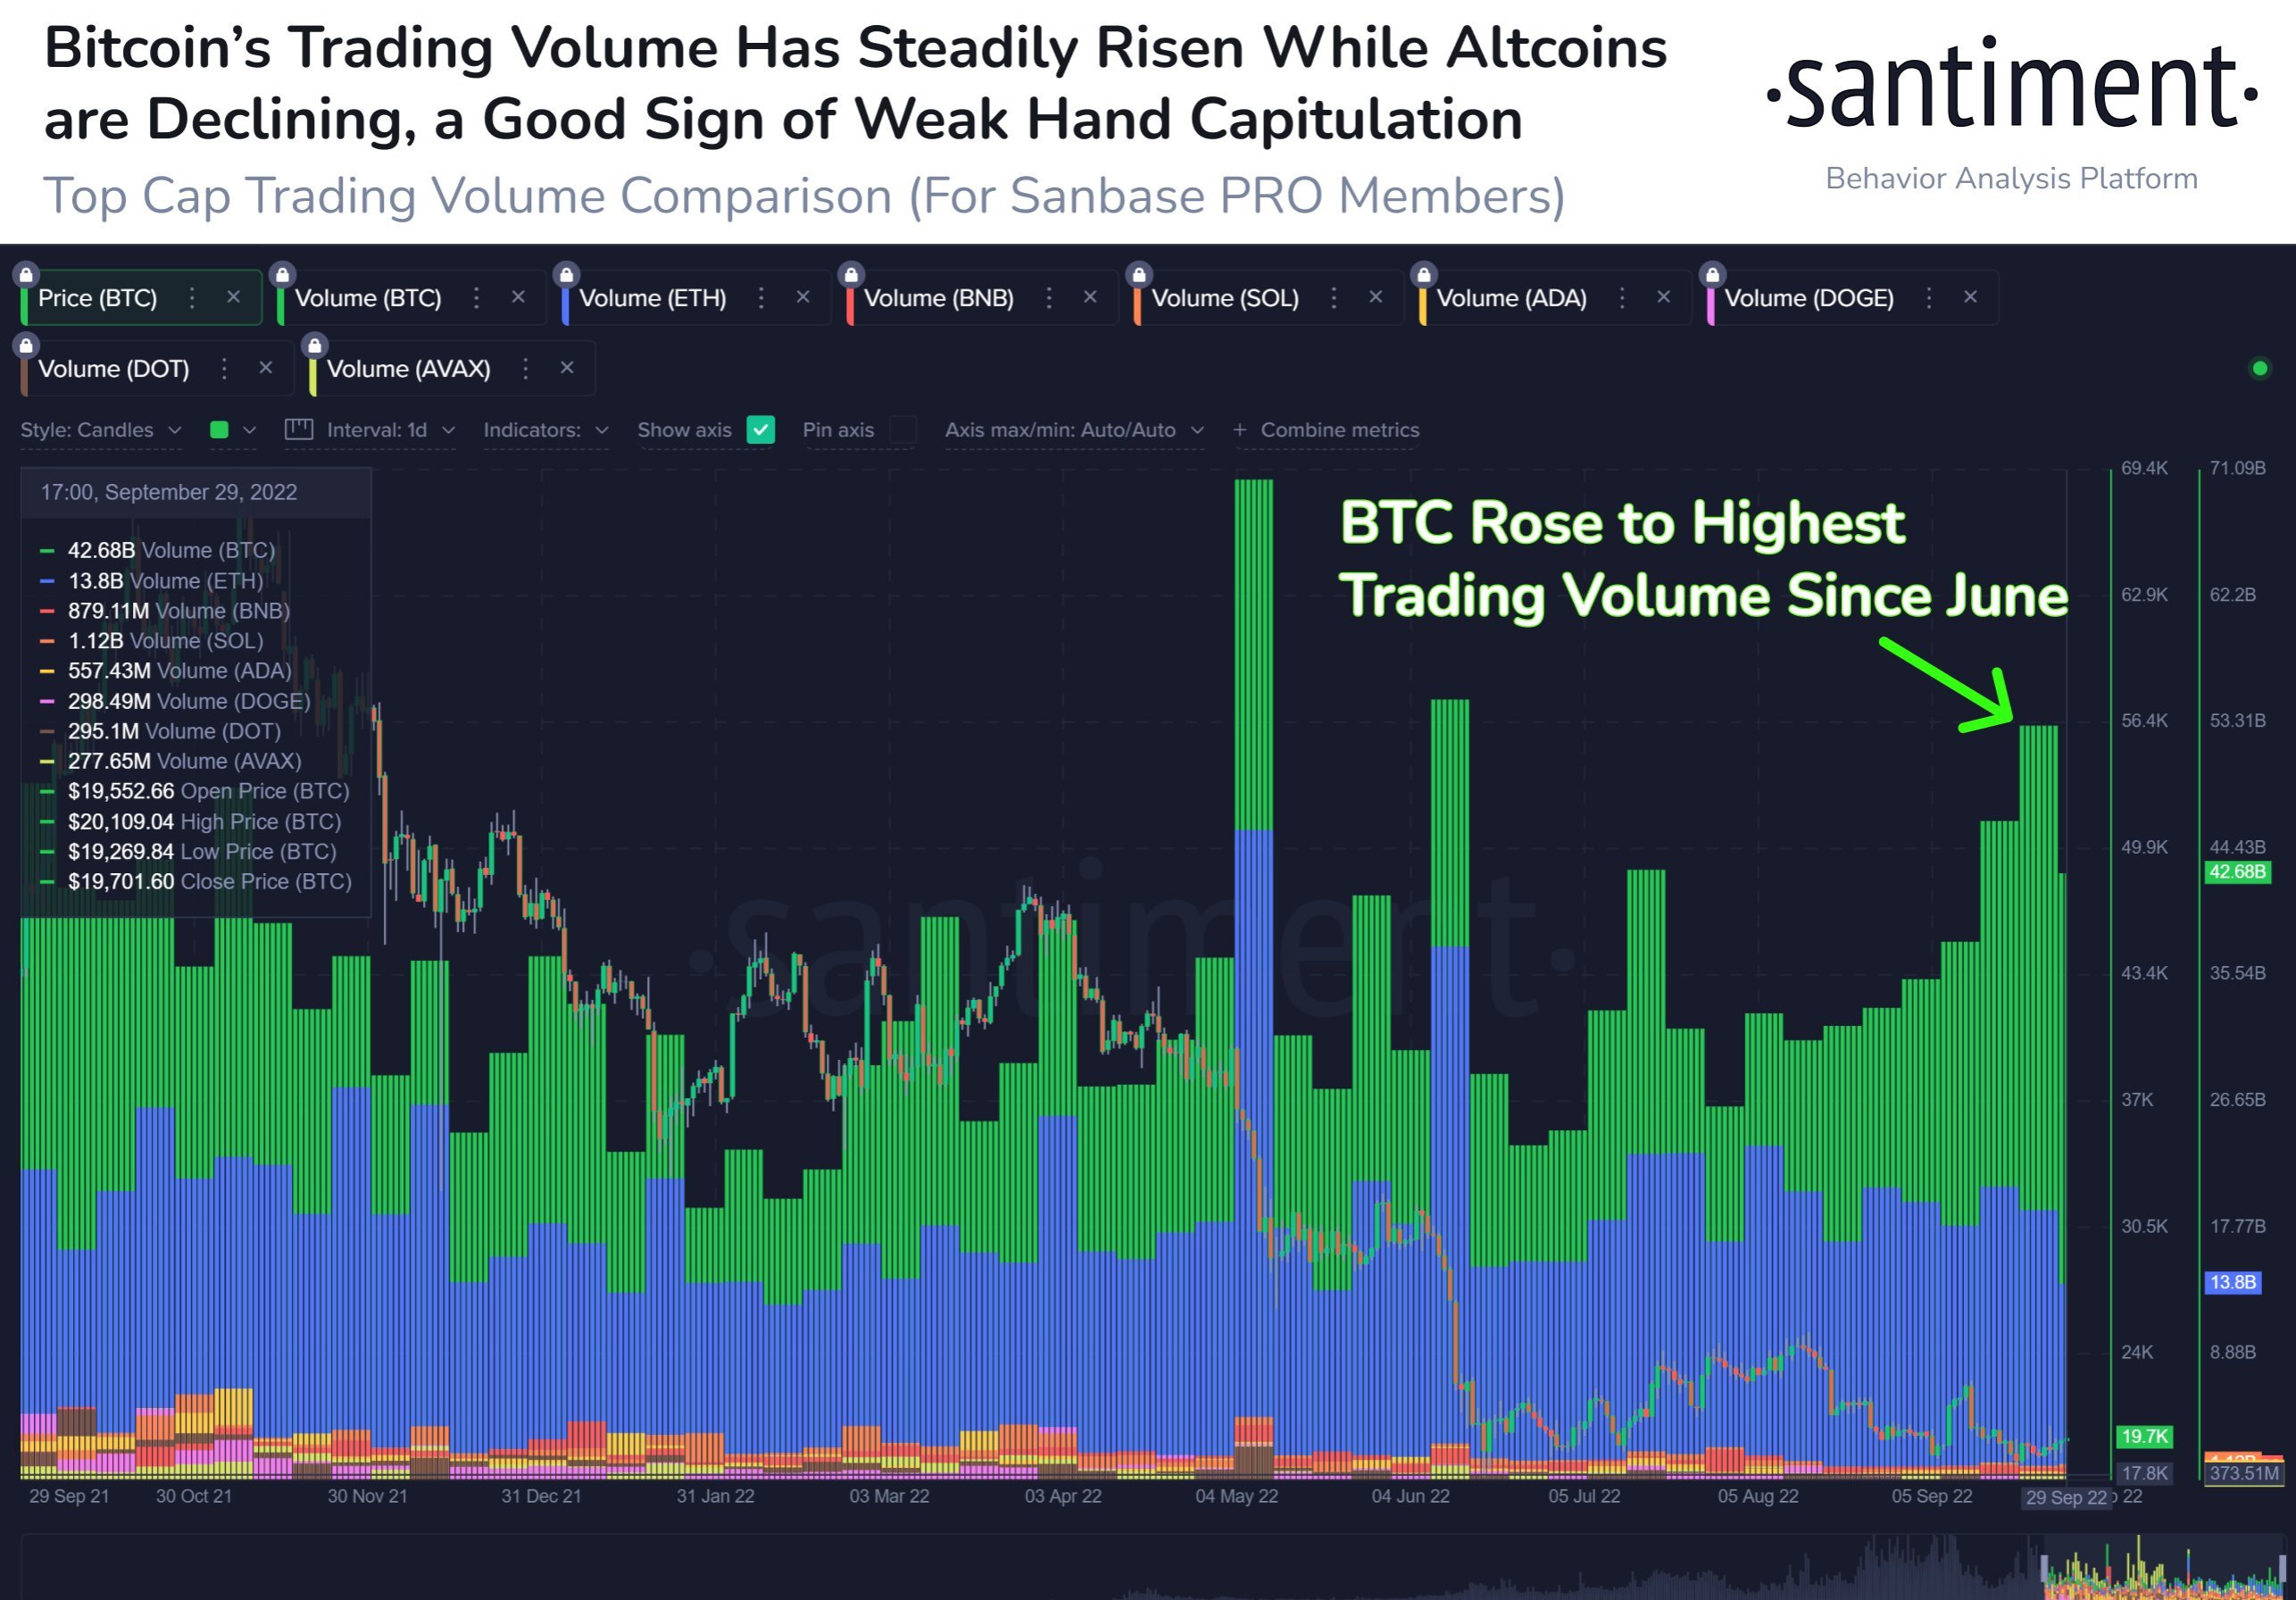 Bitcoin Trading Volume Picking Up Again – End of Bear Market?